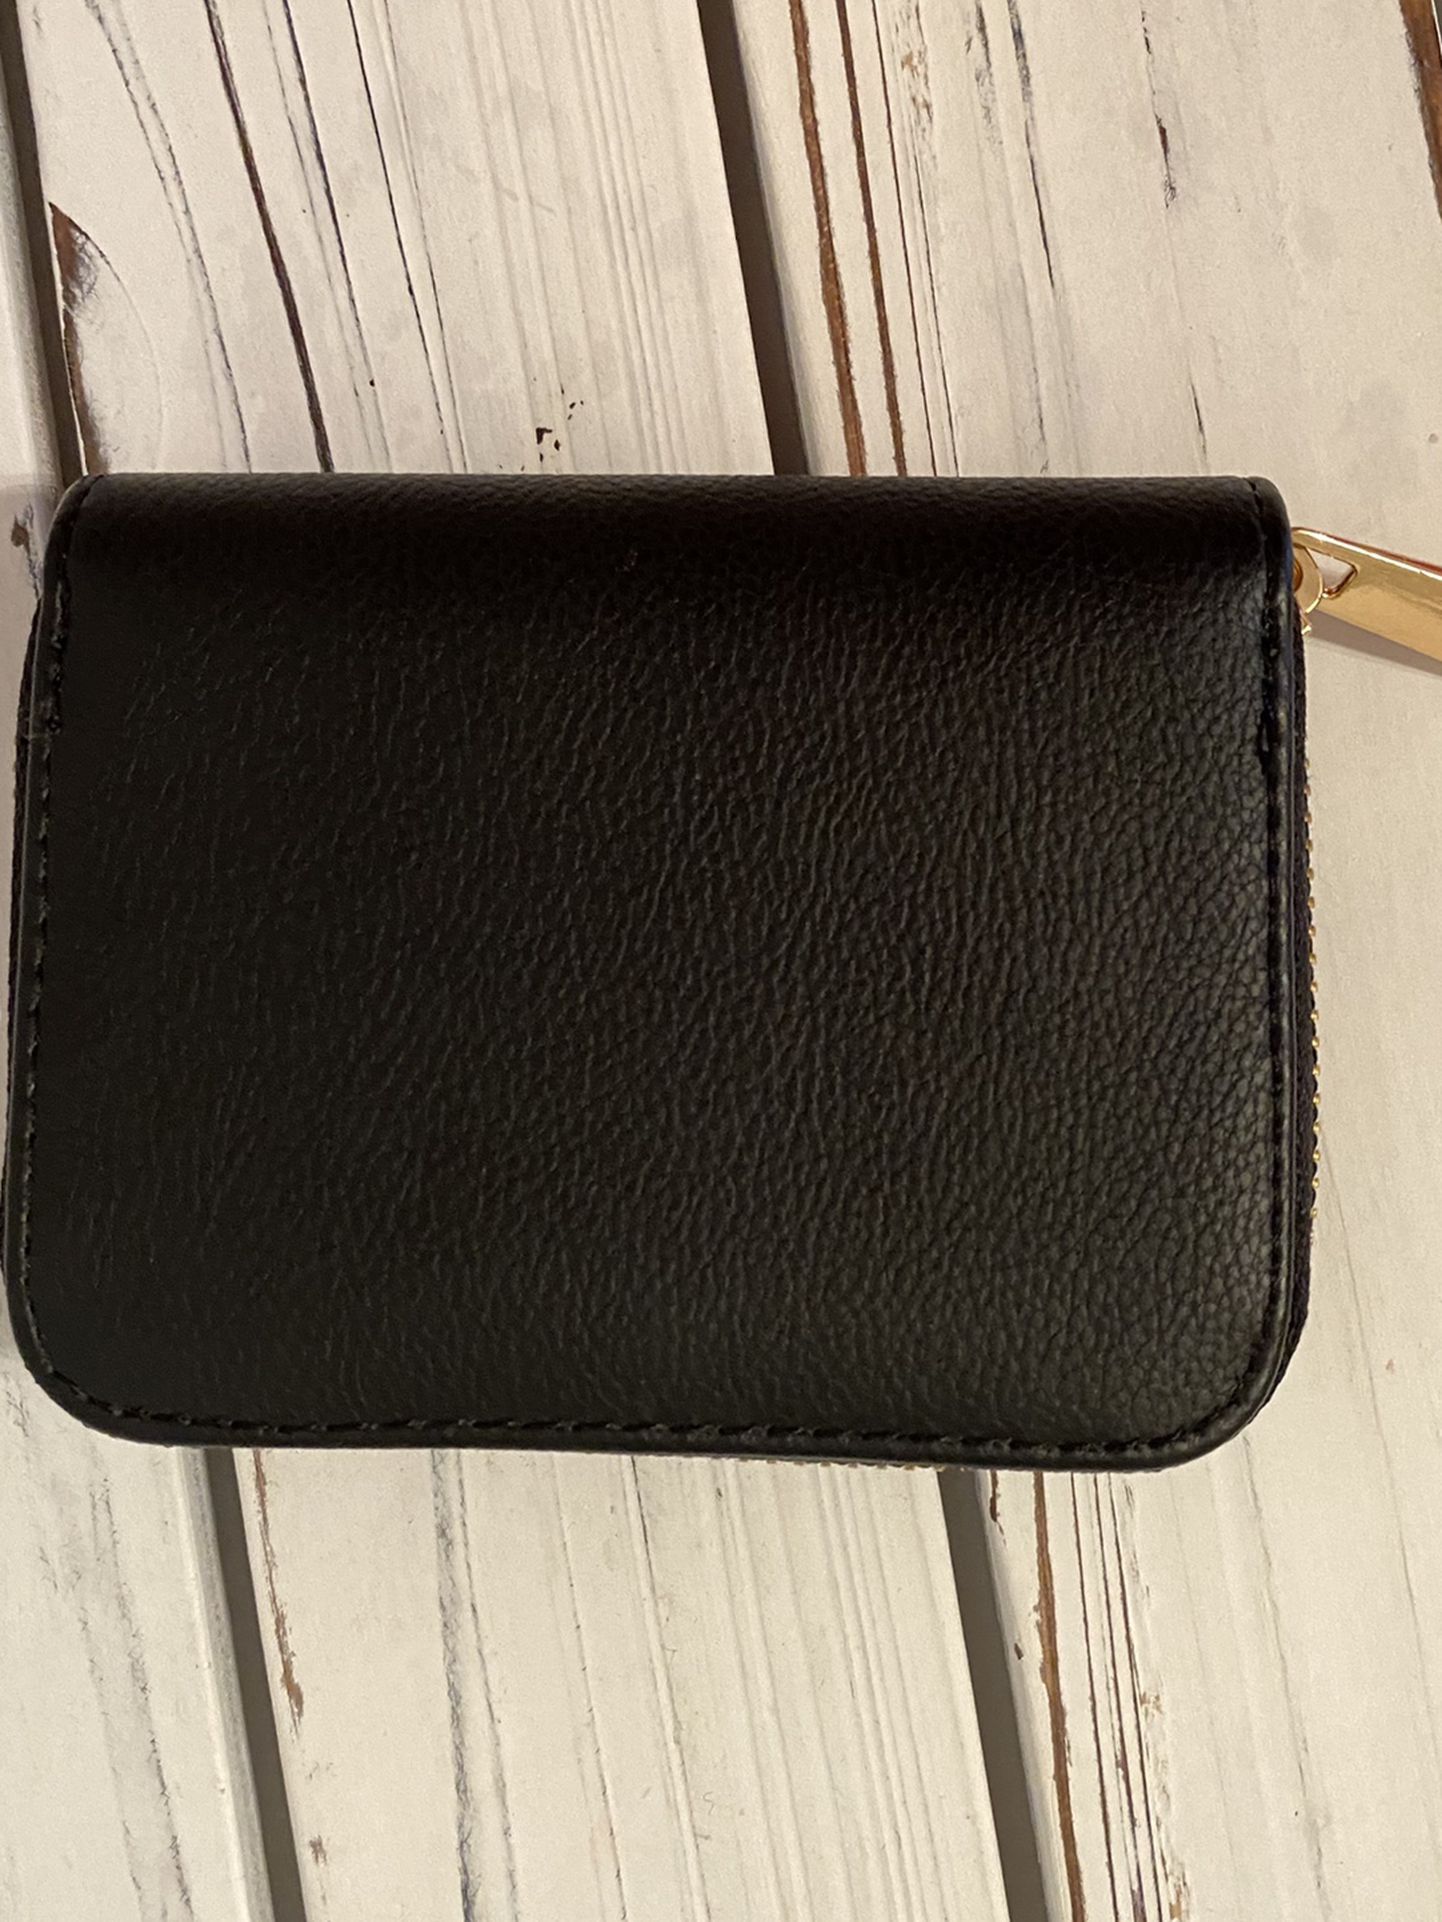 New Black Small Wallet With Zipper